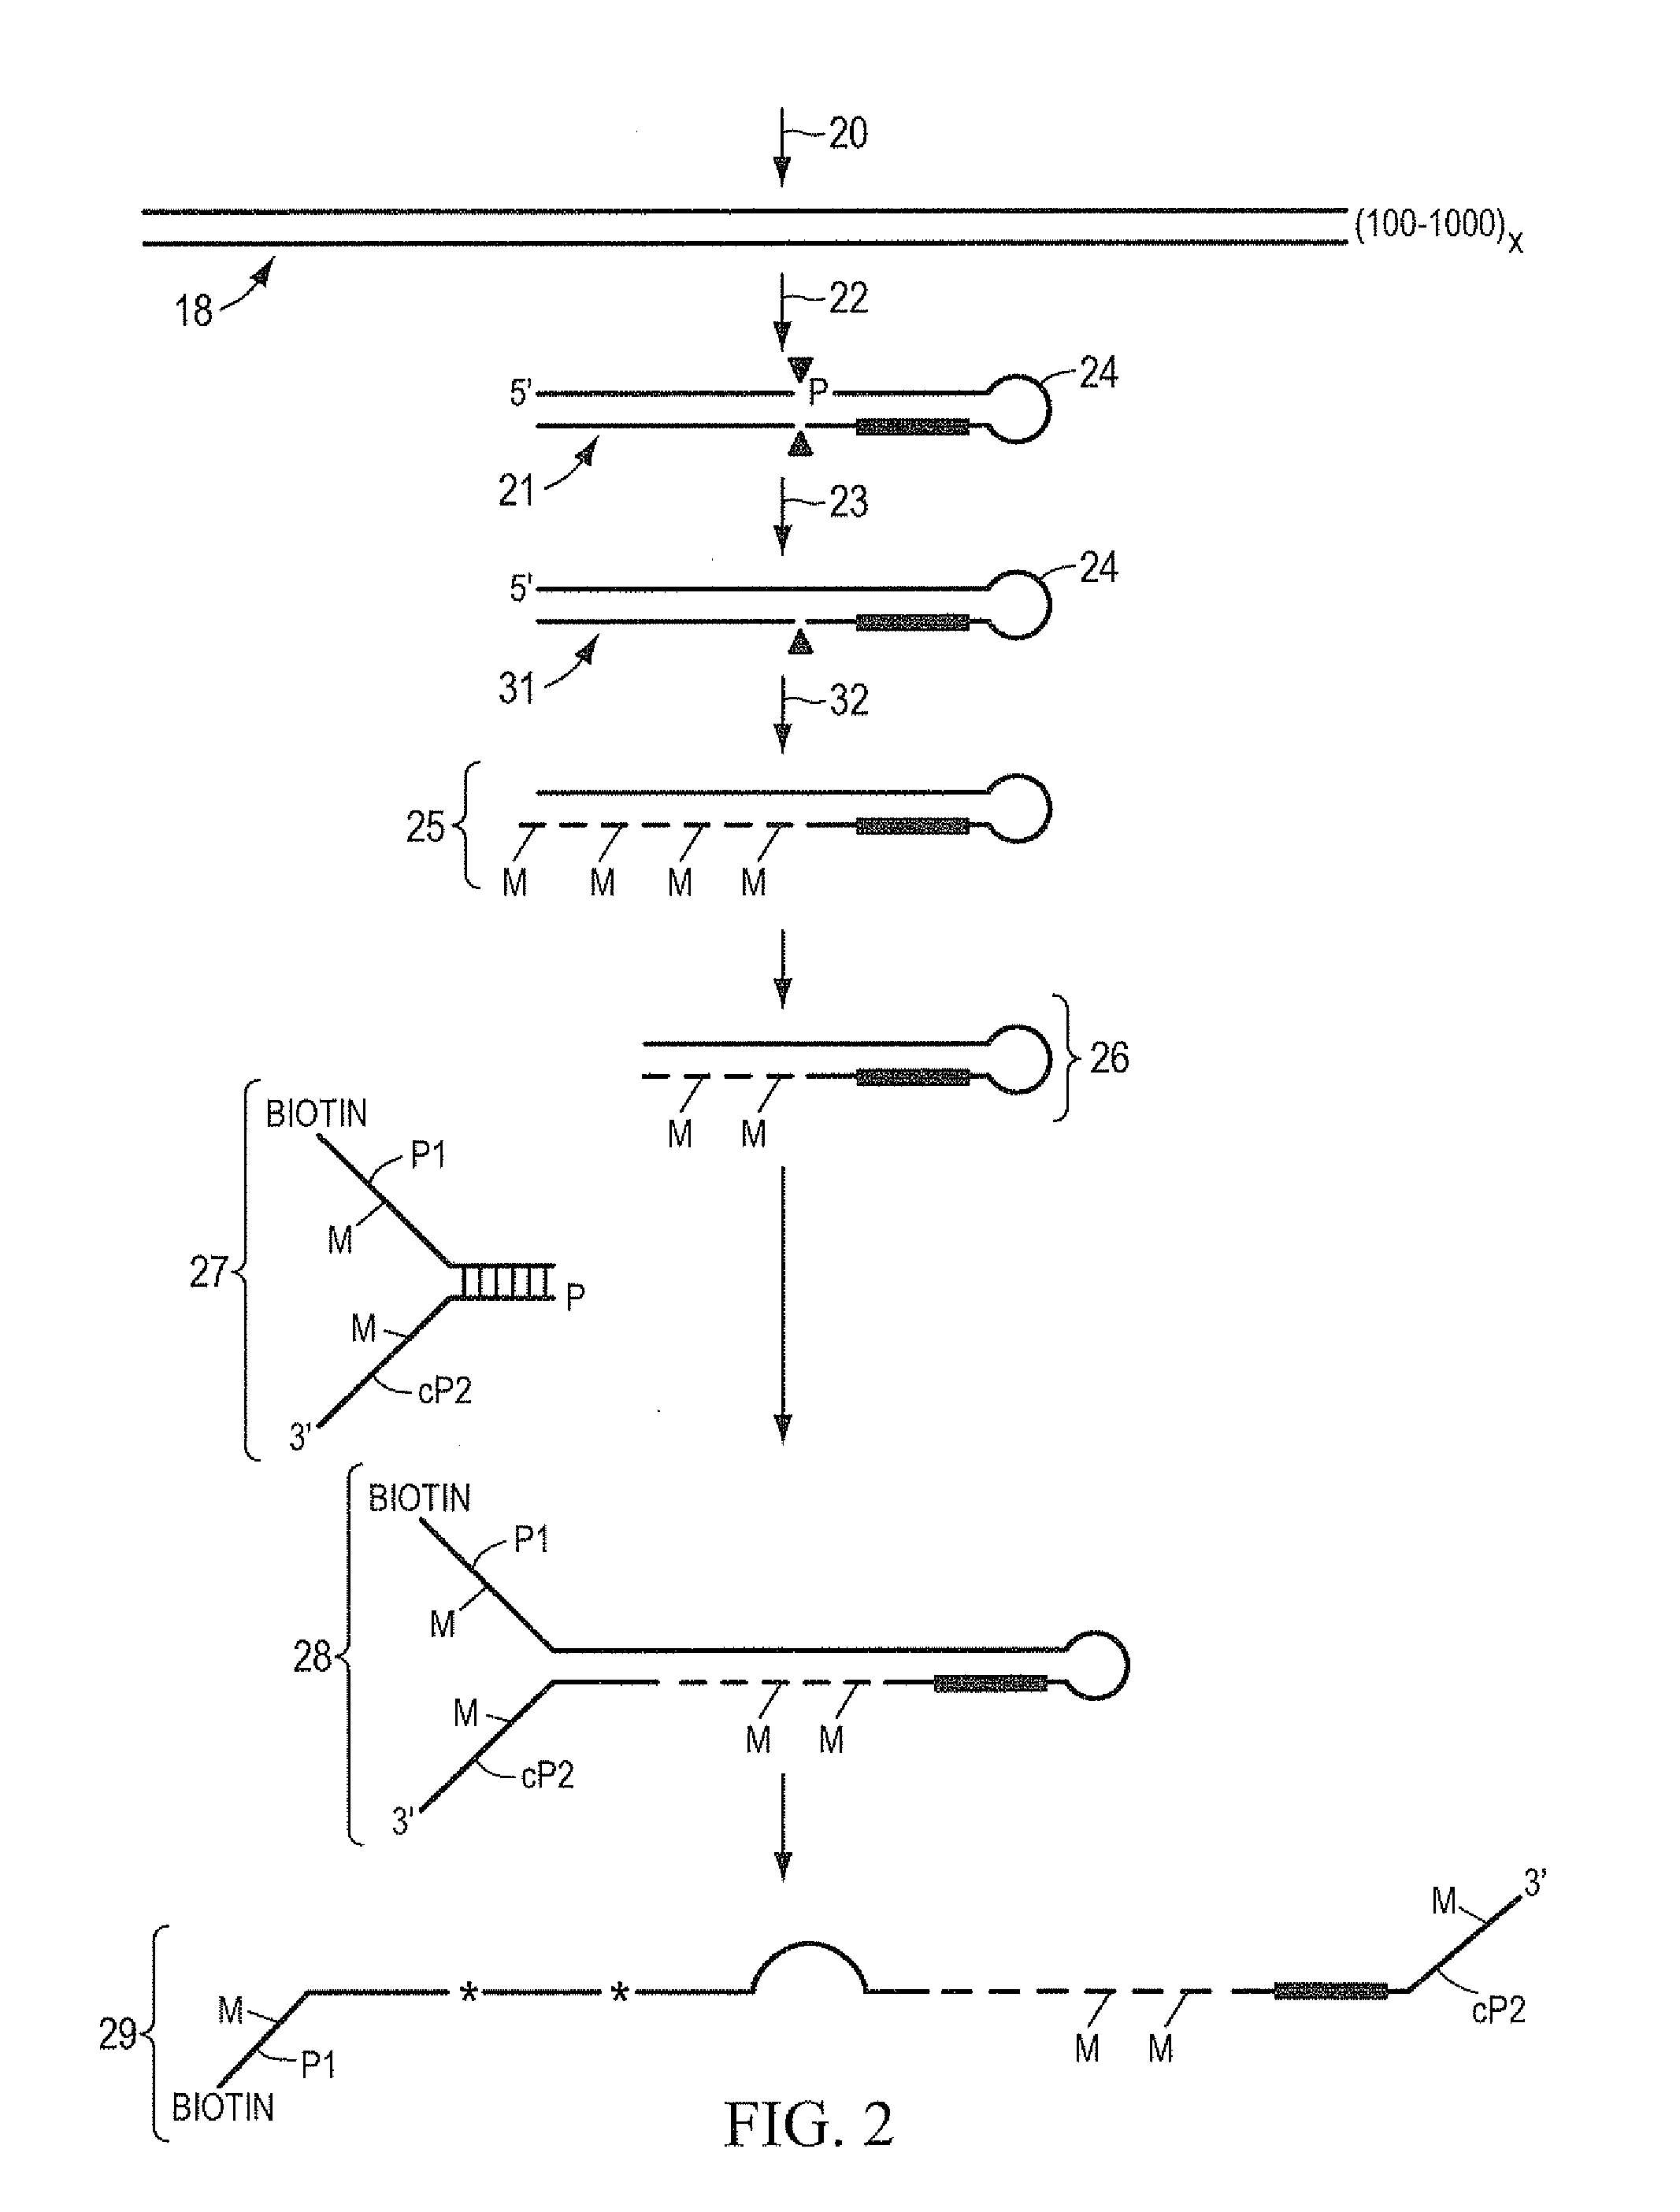 Method of sequencing and mapping target nucleic acids